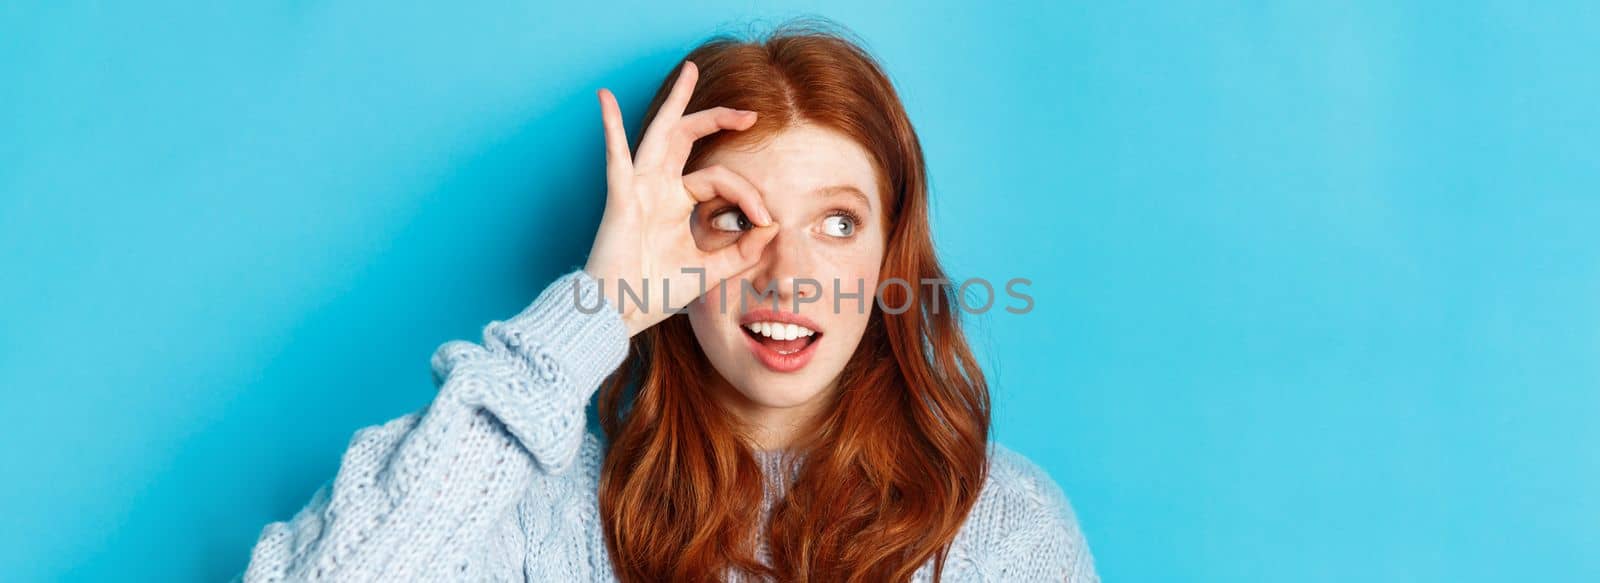 Headshot of pretty redhead girl in sweater, looking left at promo with okay sign over eye, standing against blue background.